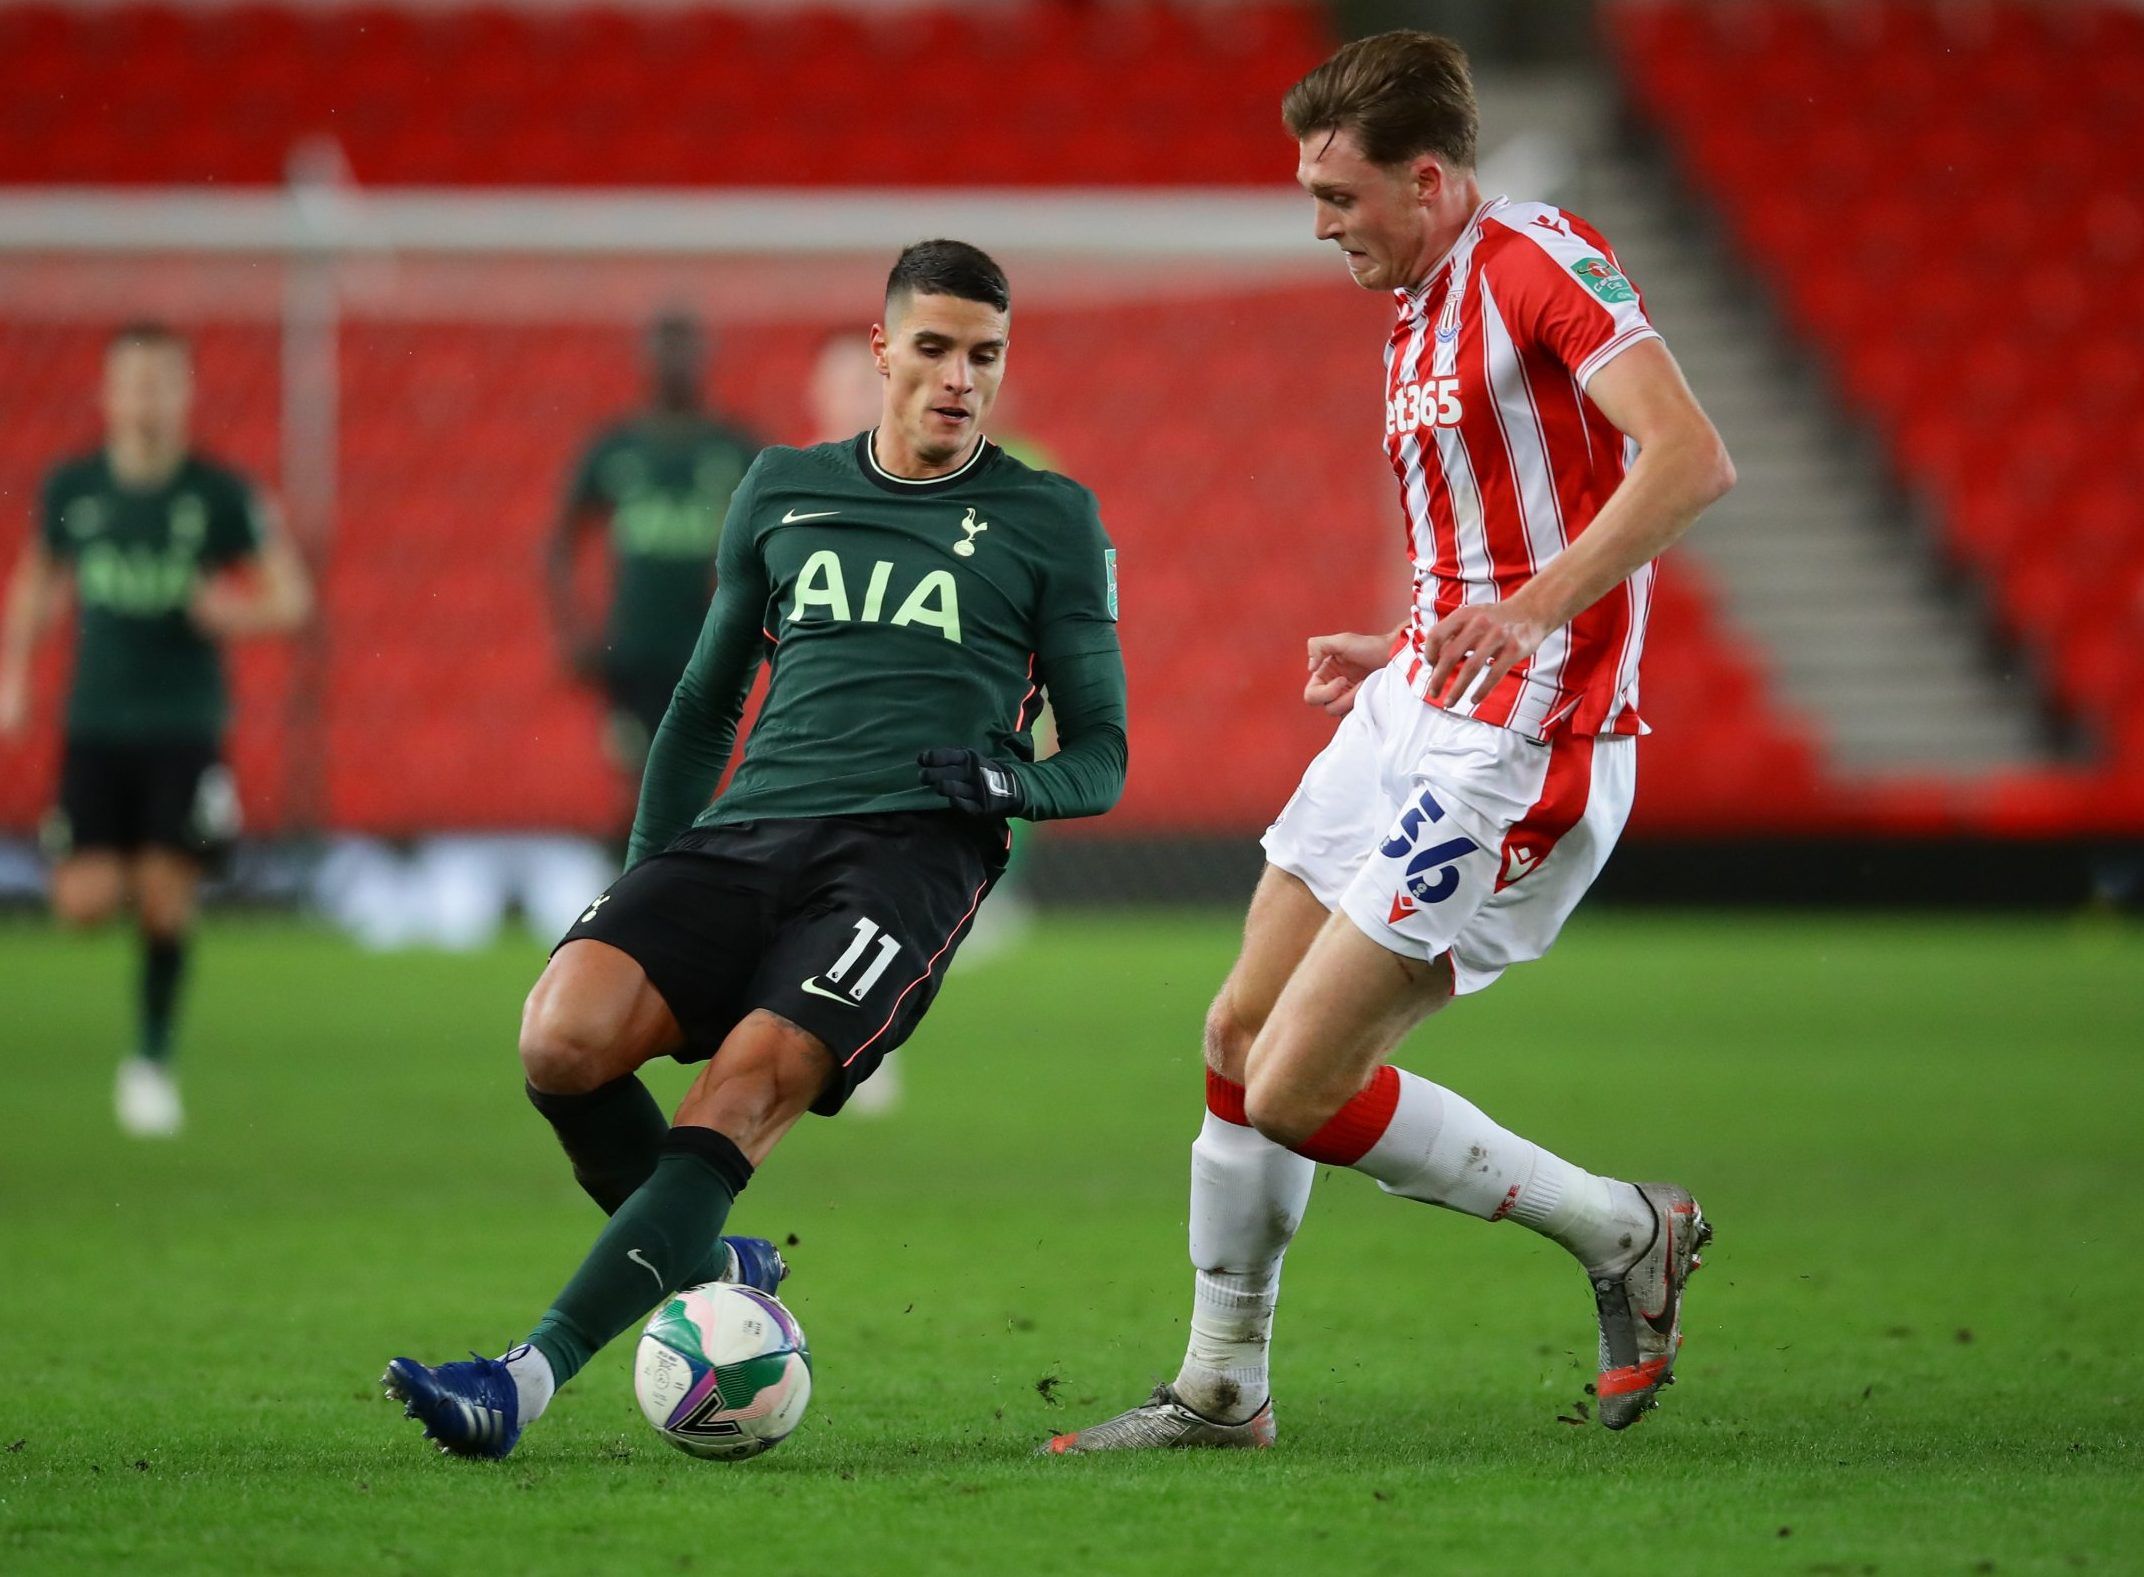 Stoke City defender Harry Souttar in action against Spurs in the Carabao Cup